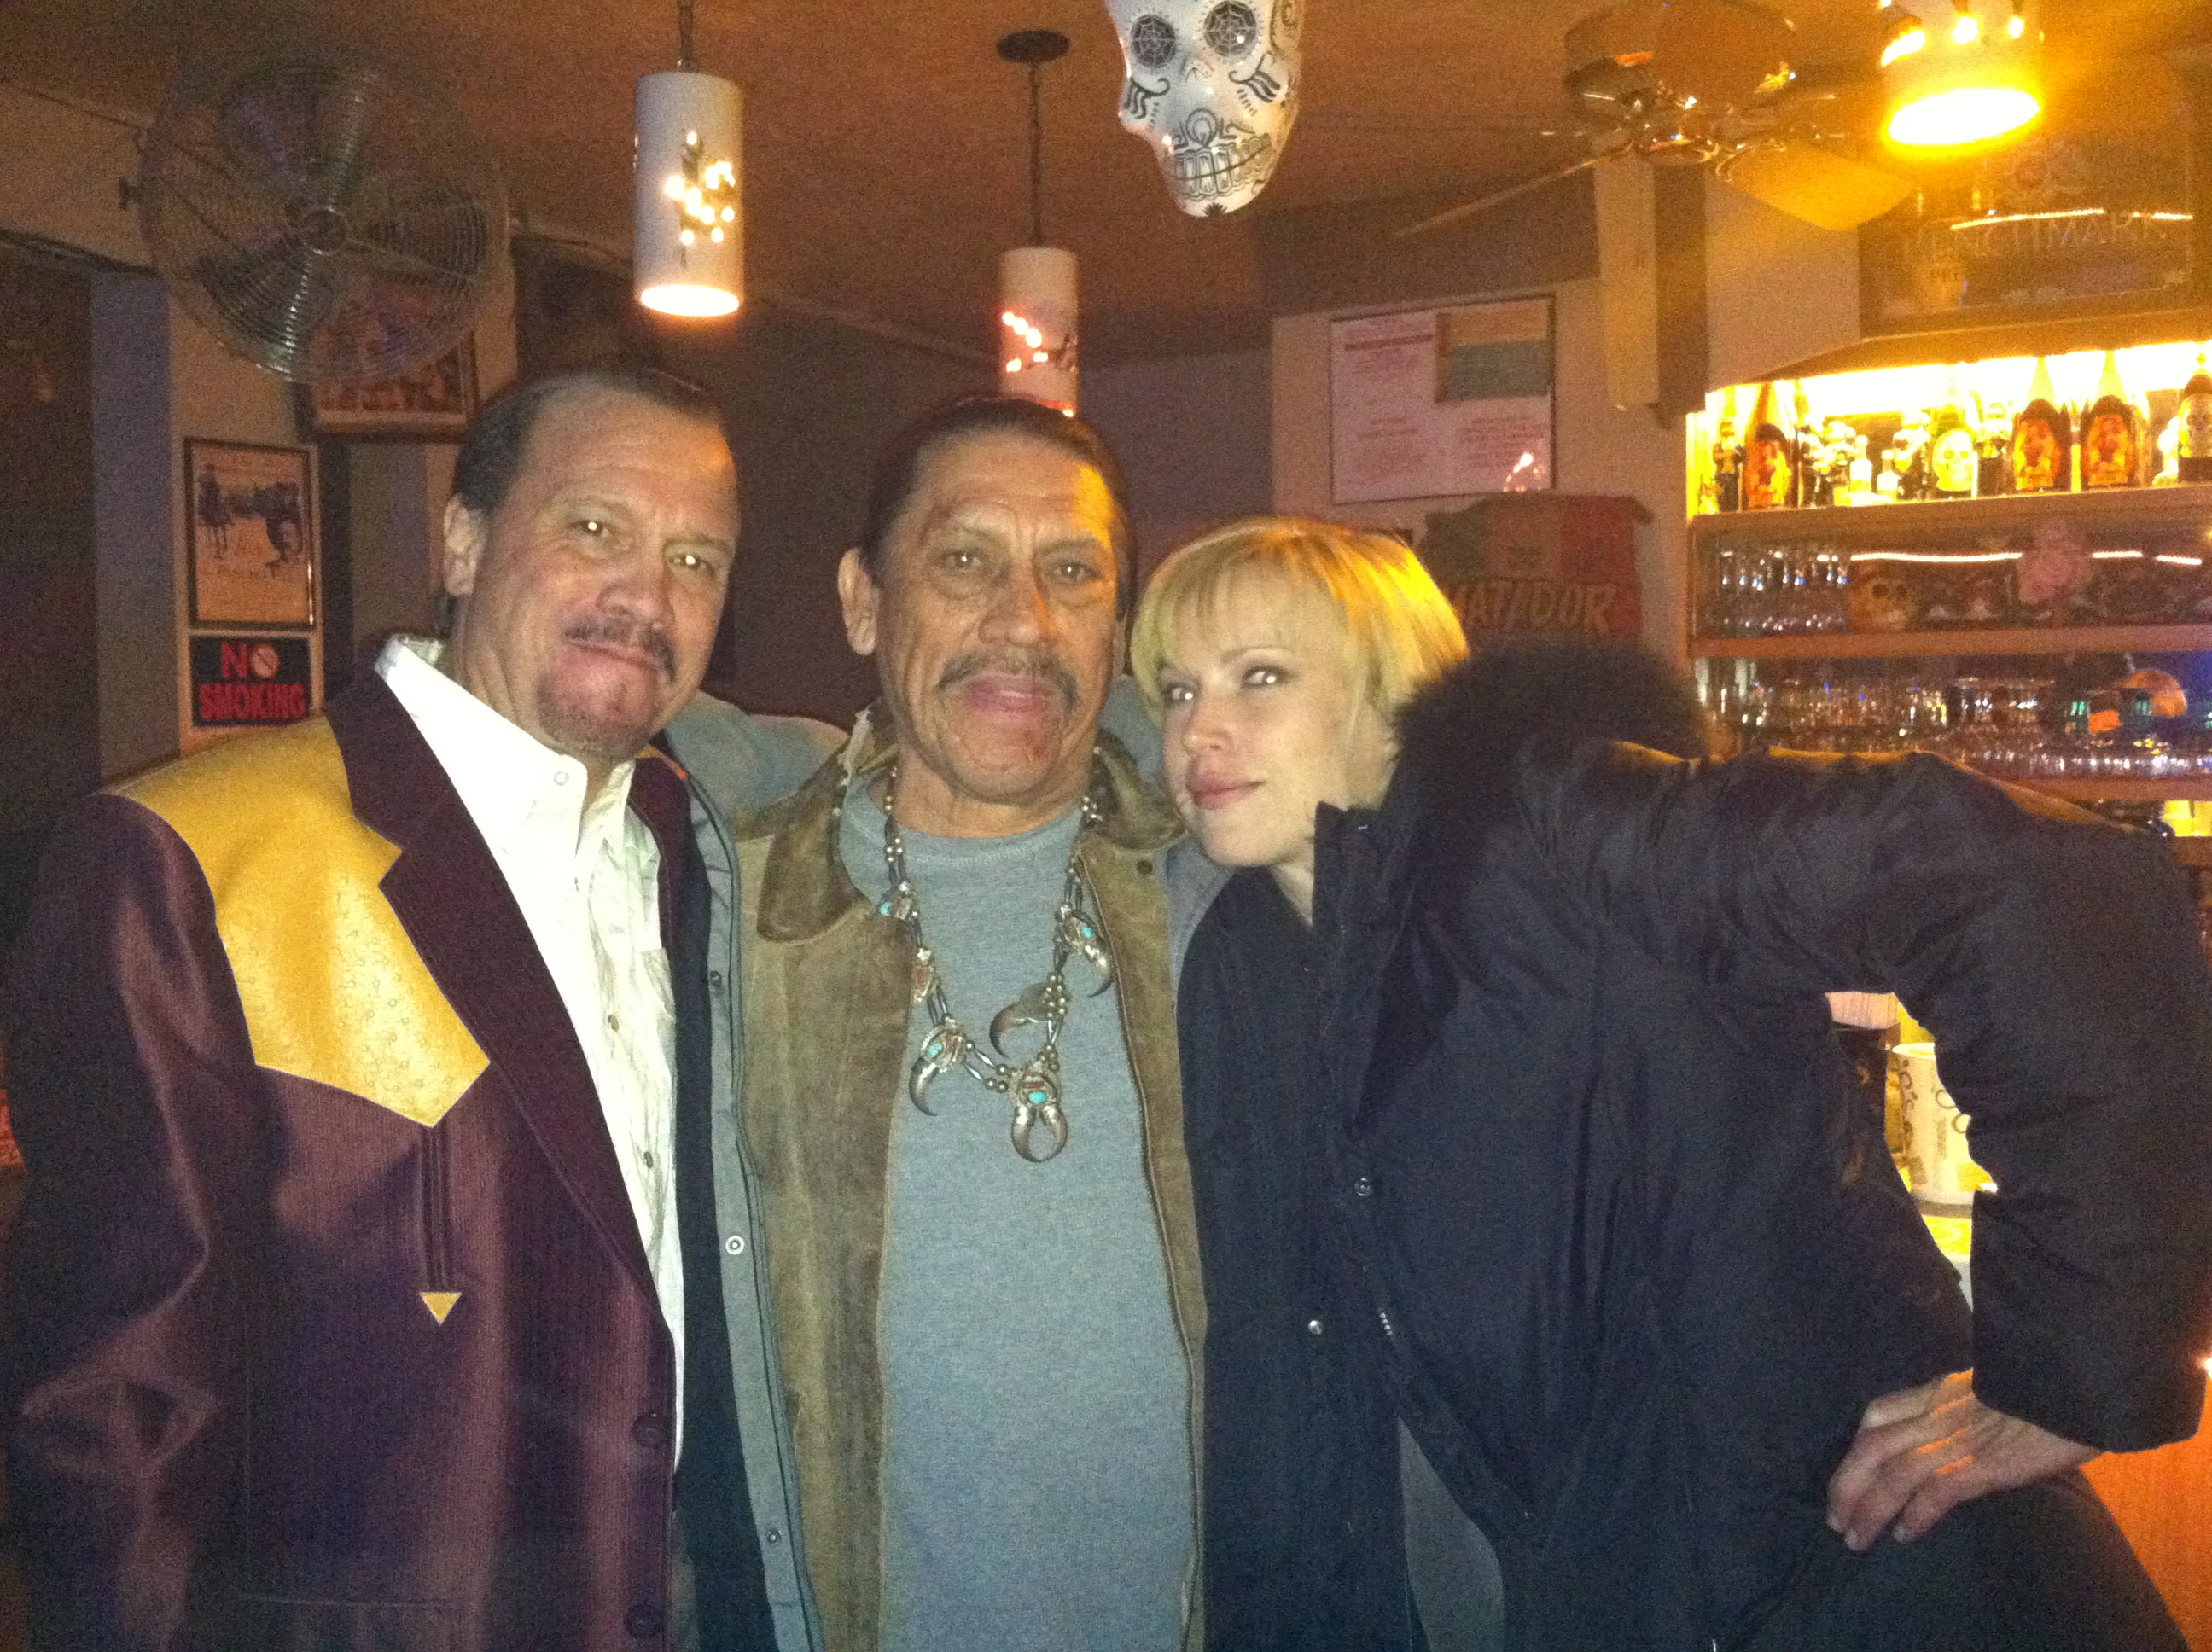 JD Garfield as Cesare with Danny Trejo and Jenny Gabrielle. On the set of Force of Execution.